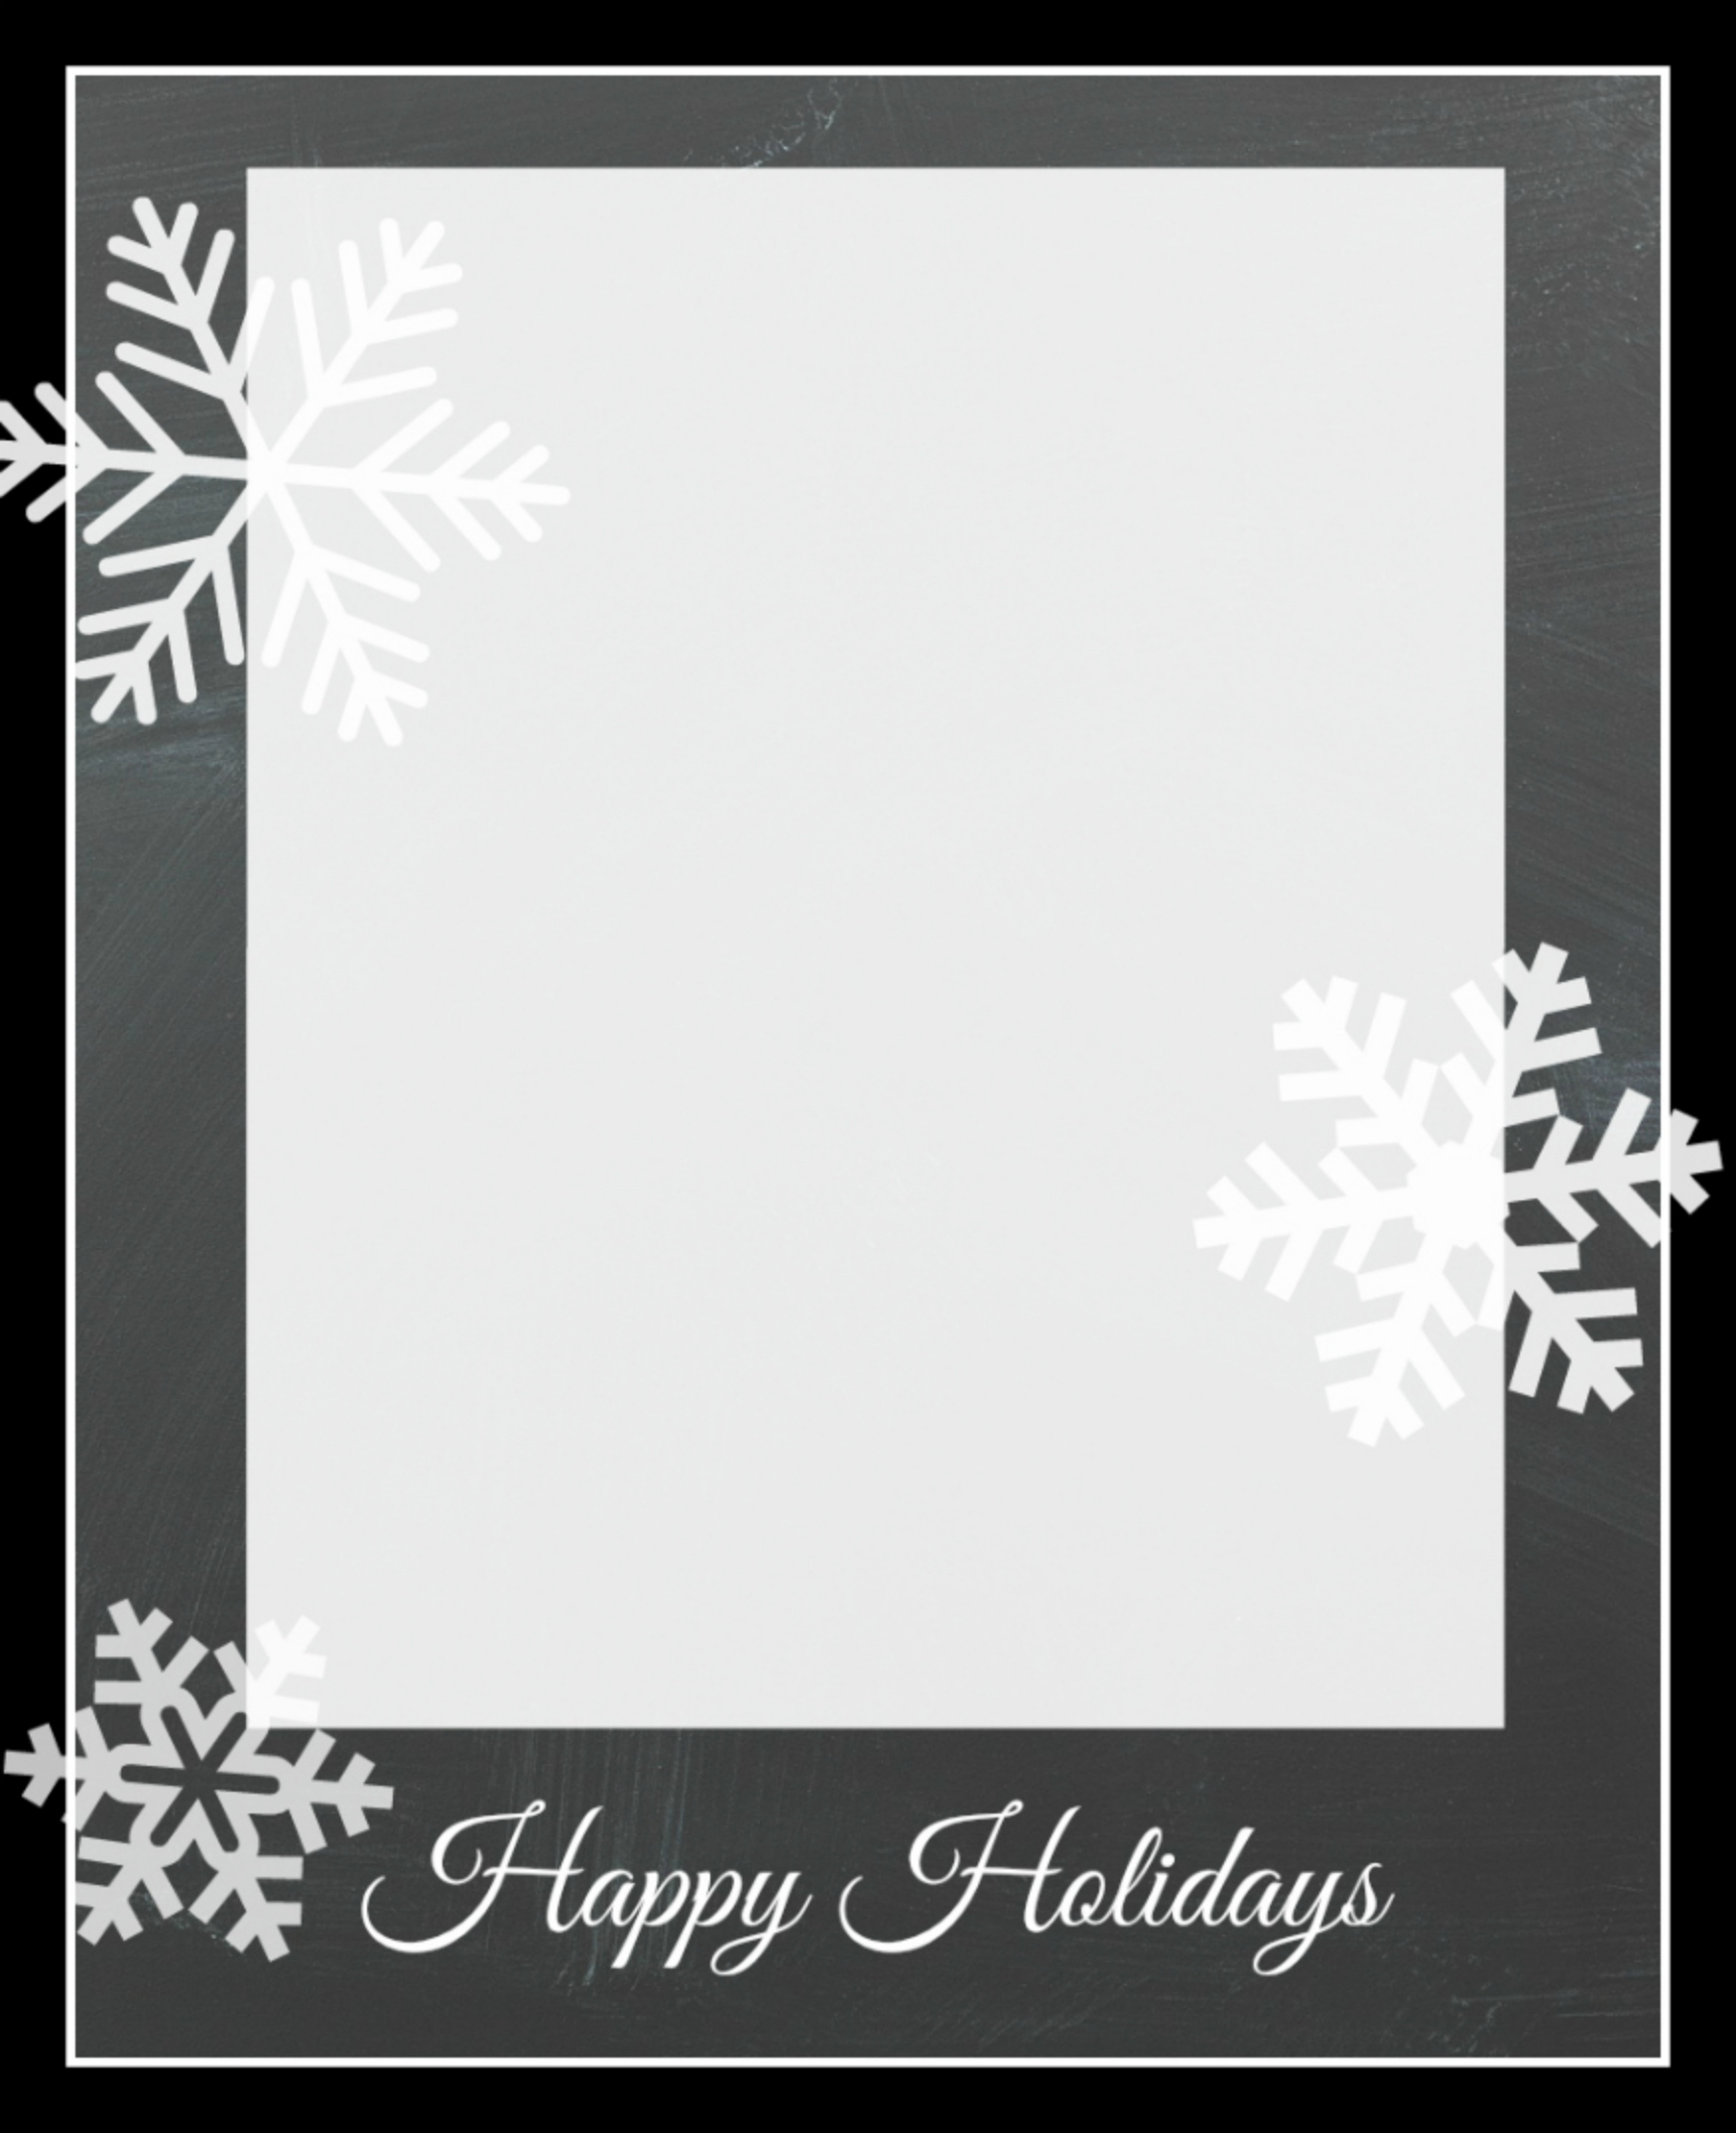 Happy Holidays Card Template - Firuse.rsd7 With Regard To Happy Holidays Card Template